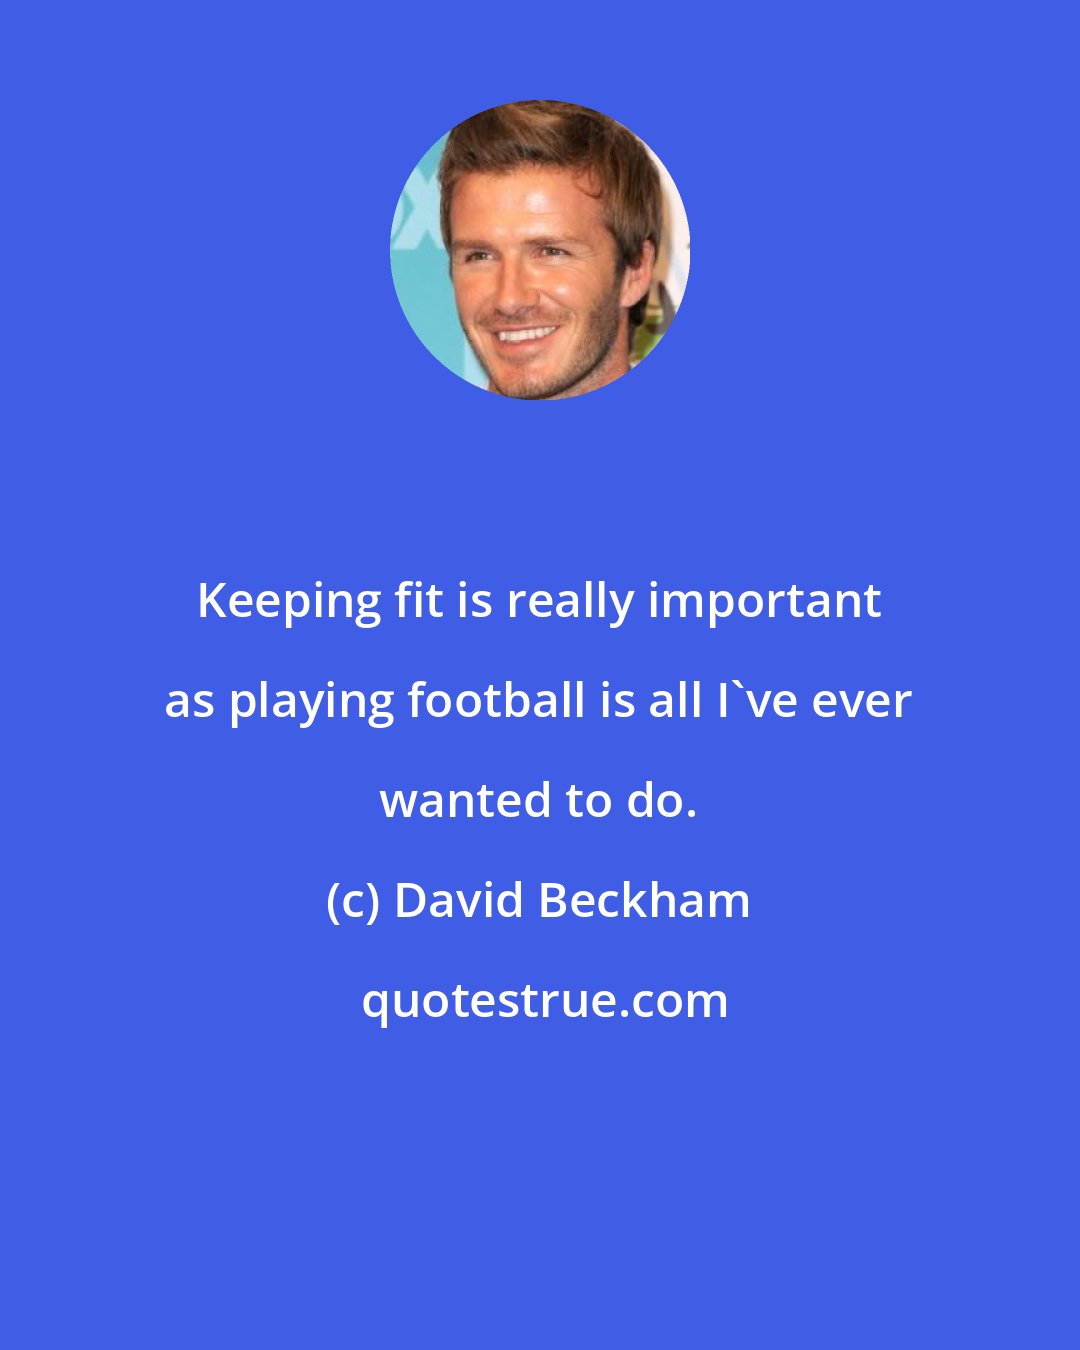 David Beckham: Keeping fit is really important as playing football is all I've ever wanted to do.